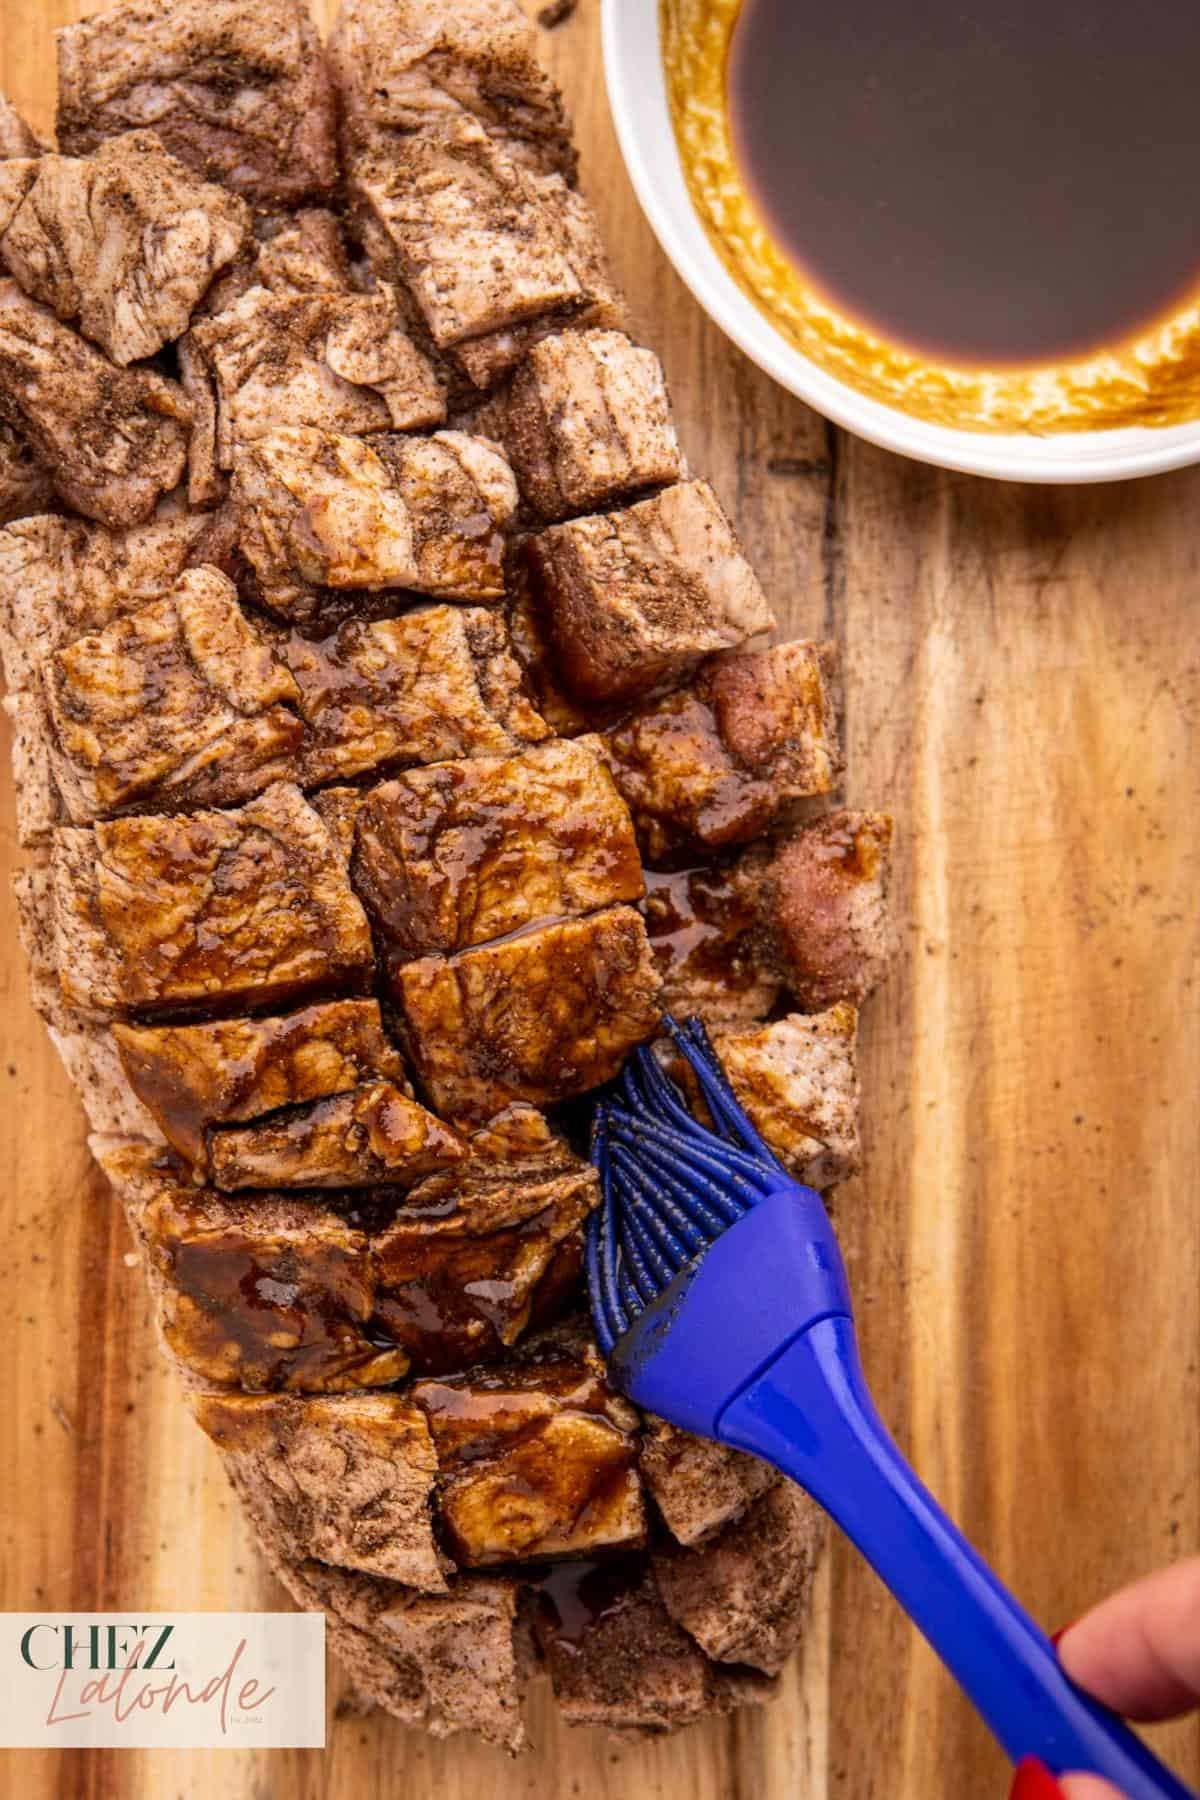 using a silicon brush to brush wet seasoning on the meat.